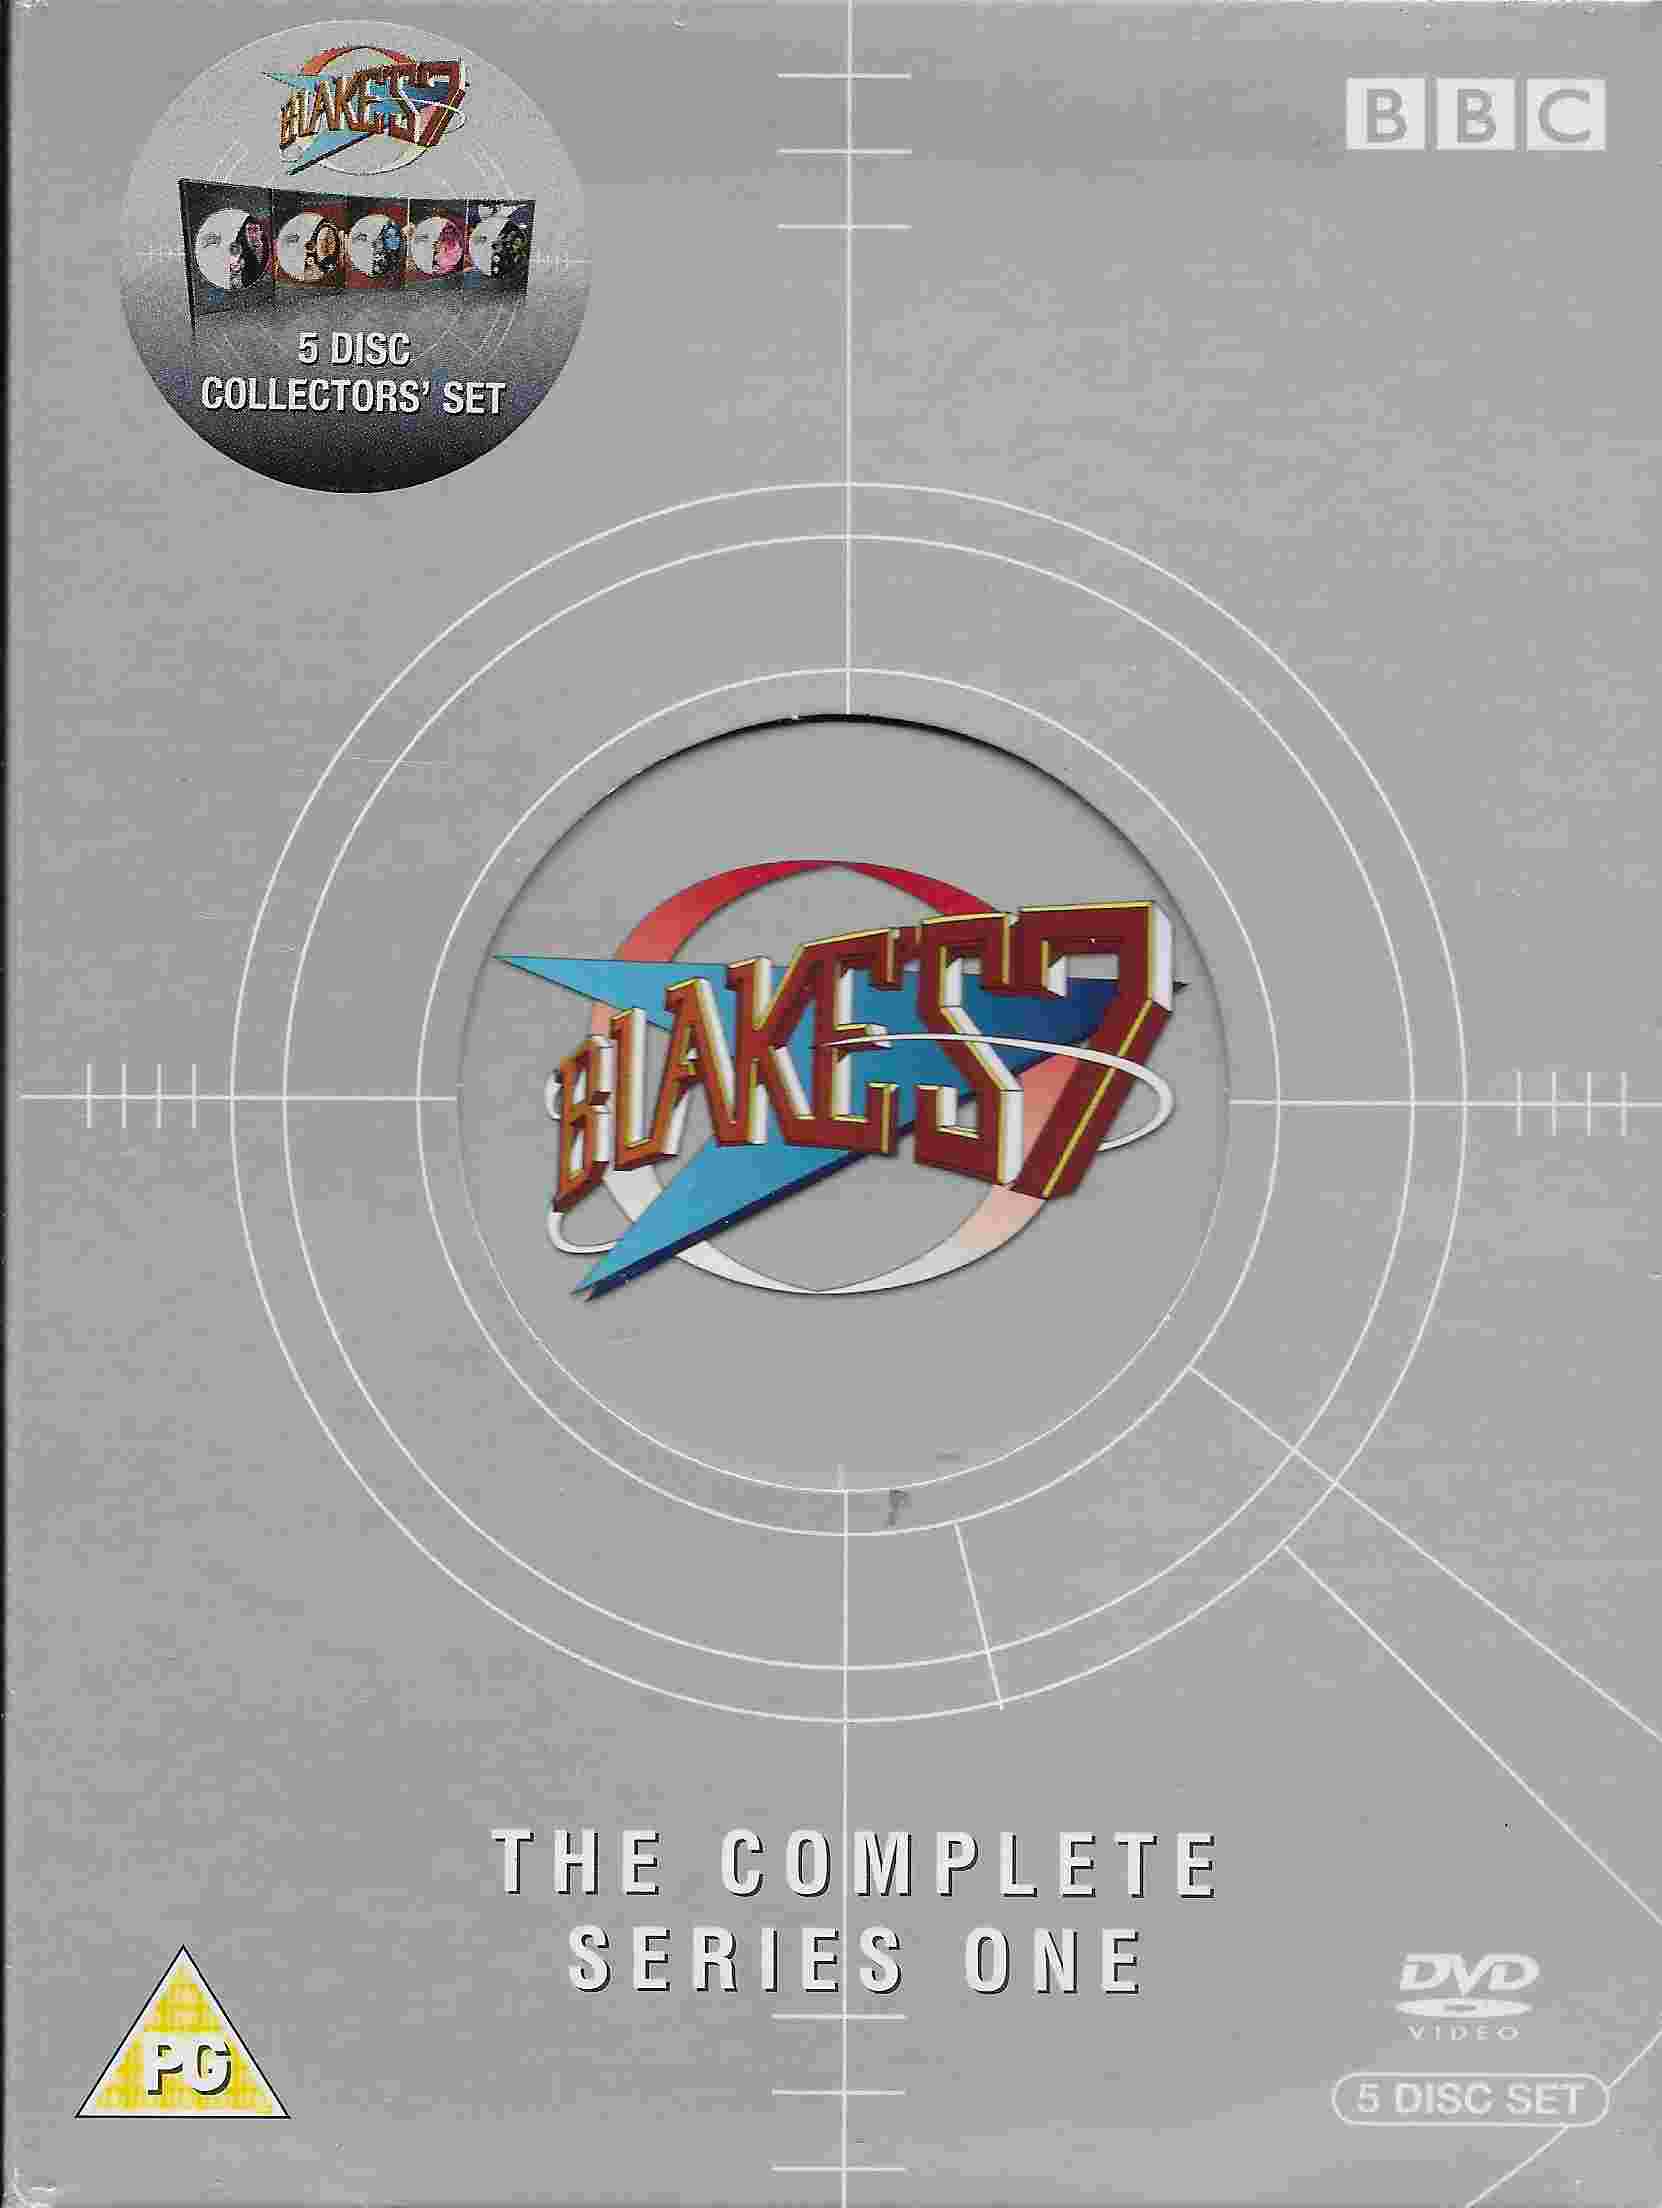 Picture of BBCDVD 1176 Blake's 7 - Series 1 by artist Terry Nation from the BBC dvds - Records and Tapes library